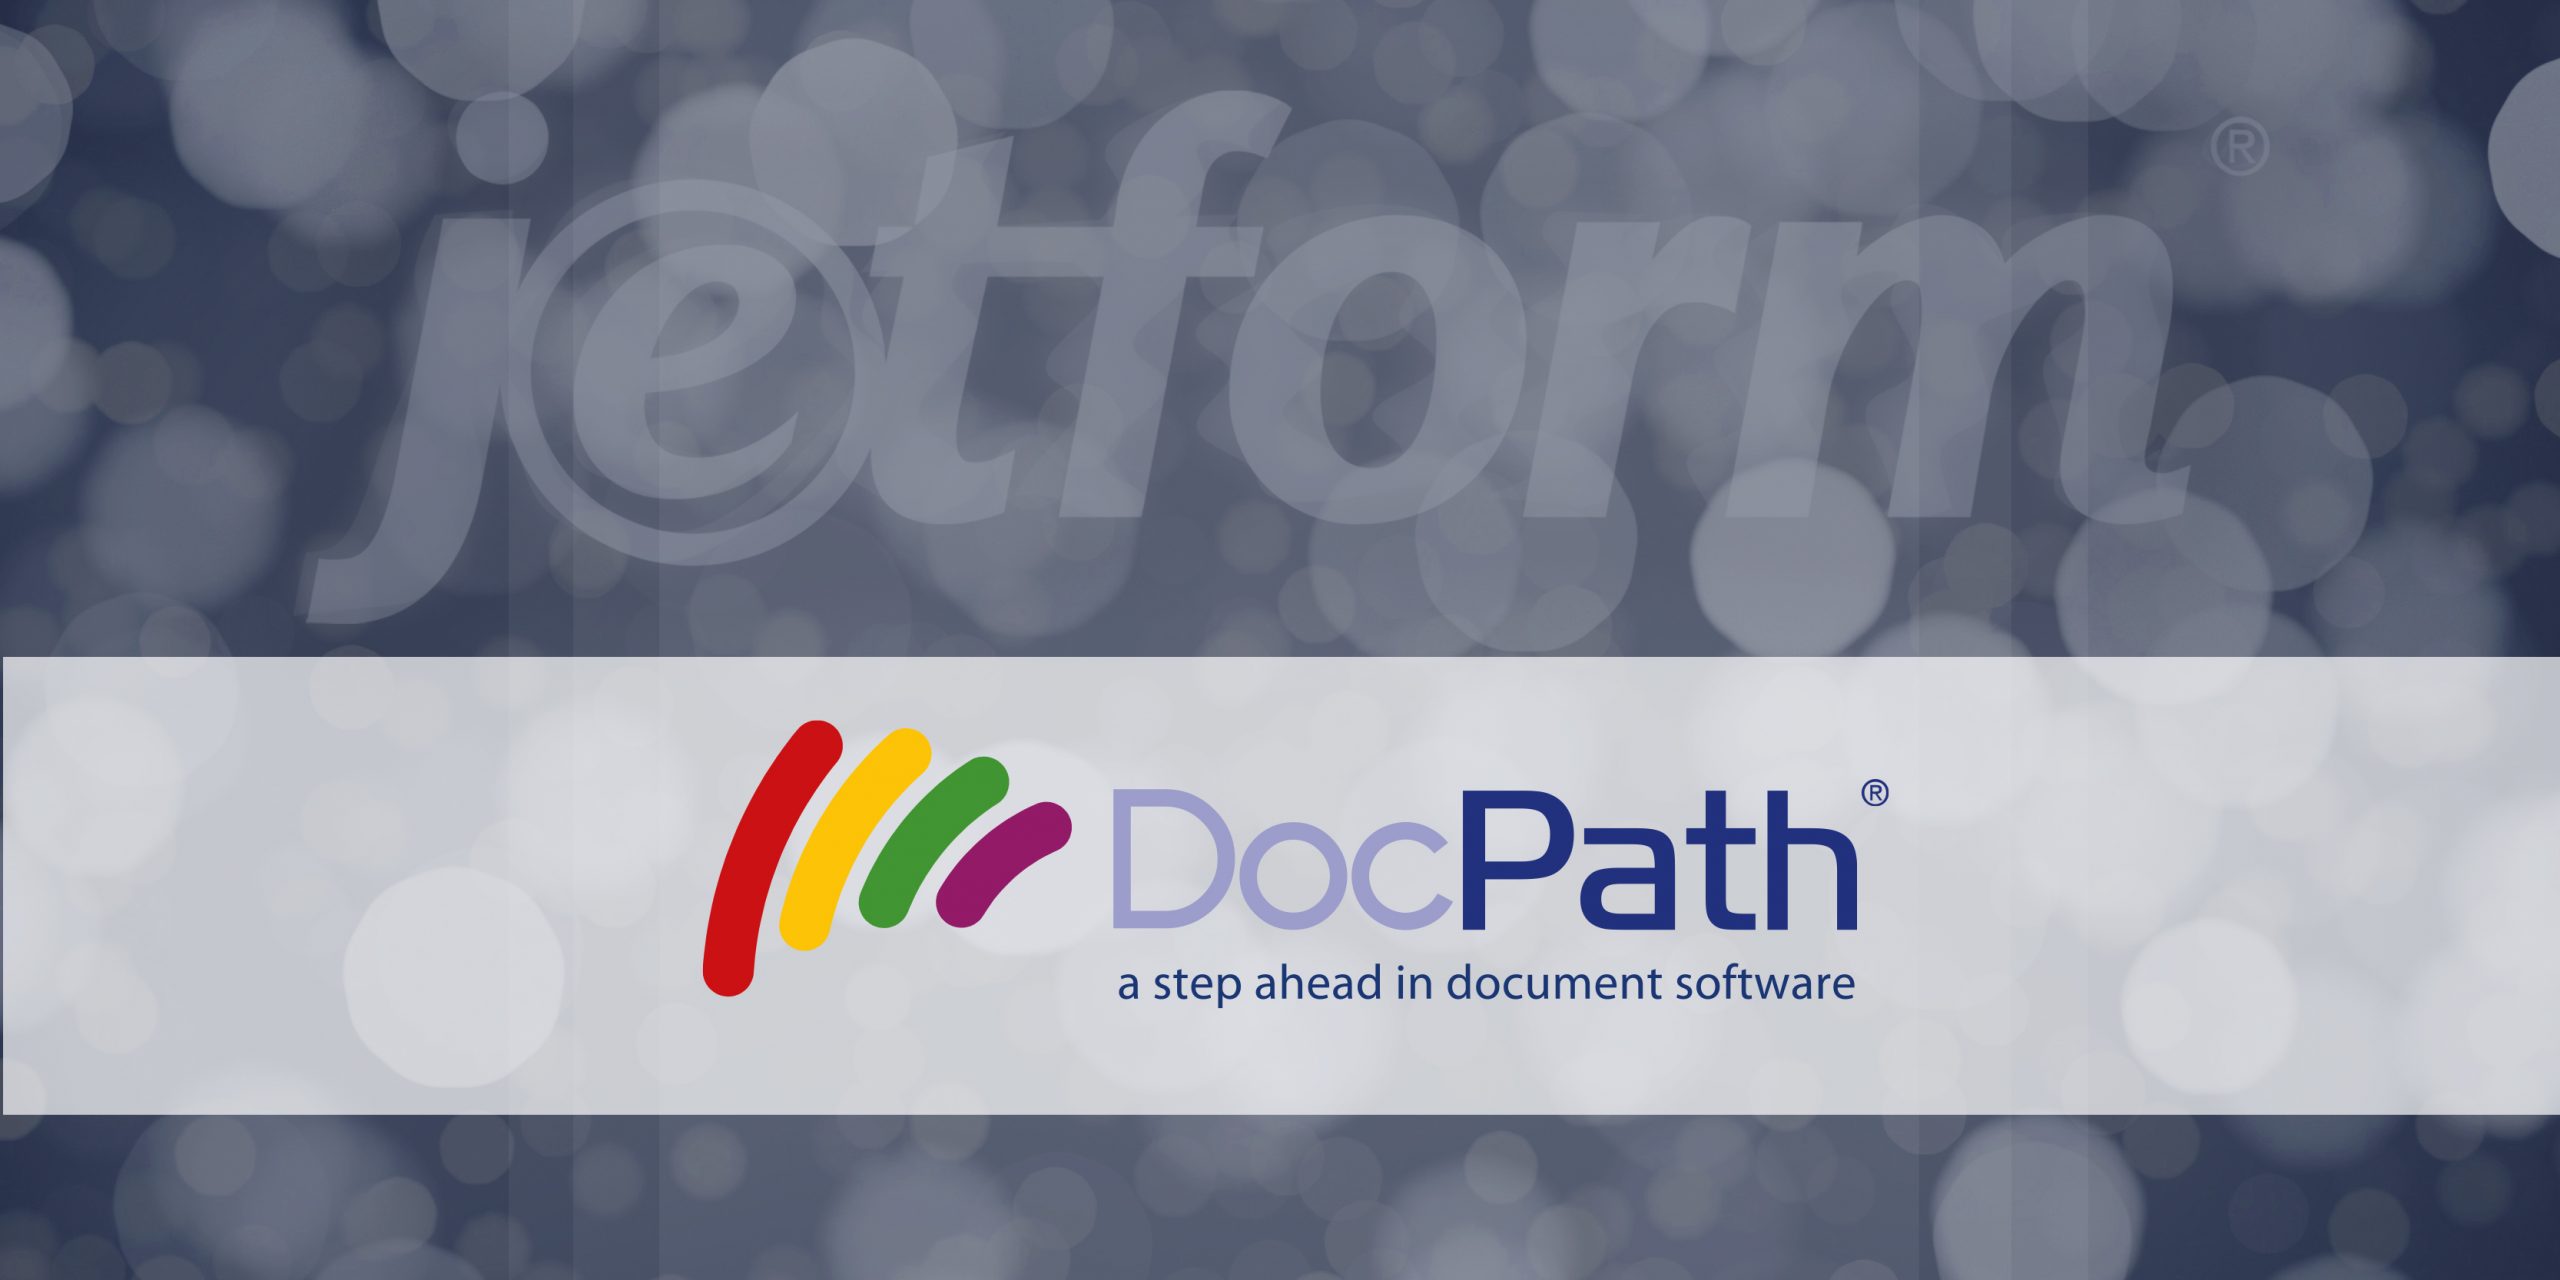 2 JetForm/Adobe Central Server replacement projects, successfully completed by DocPath